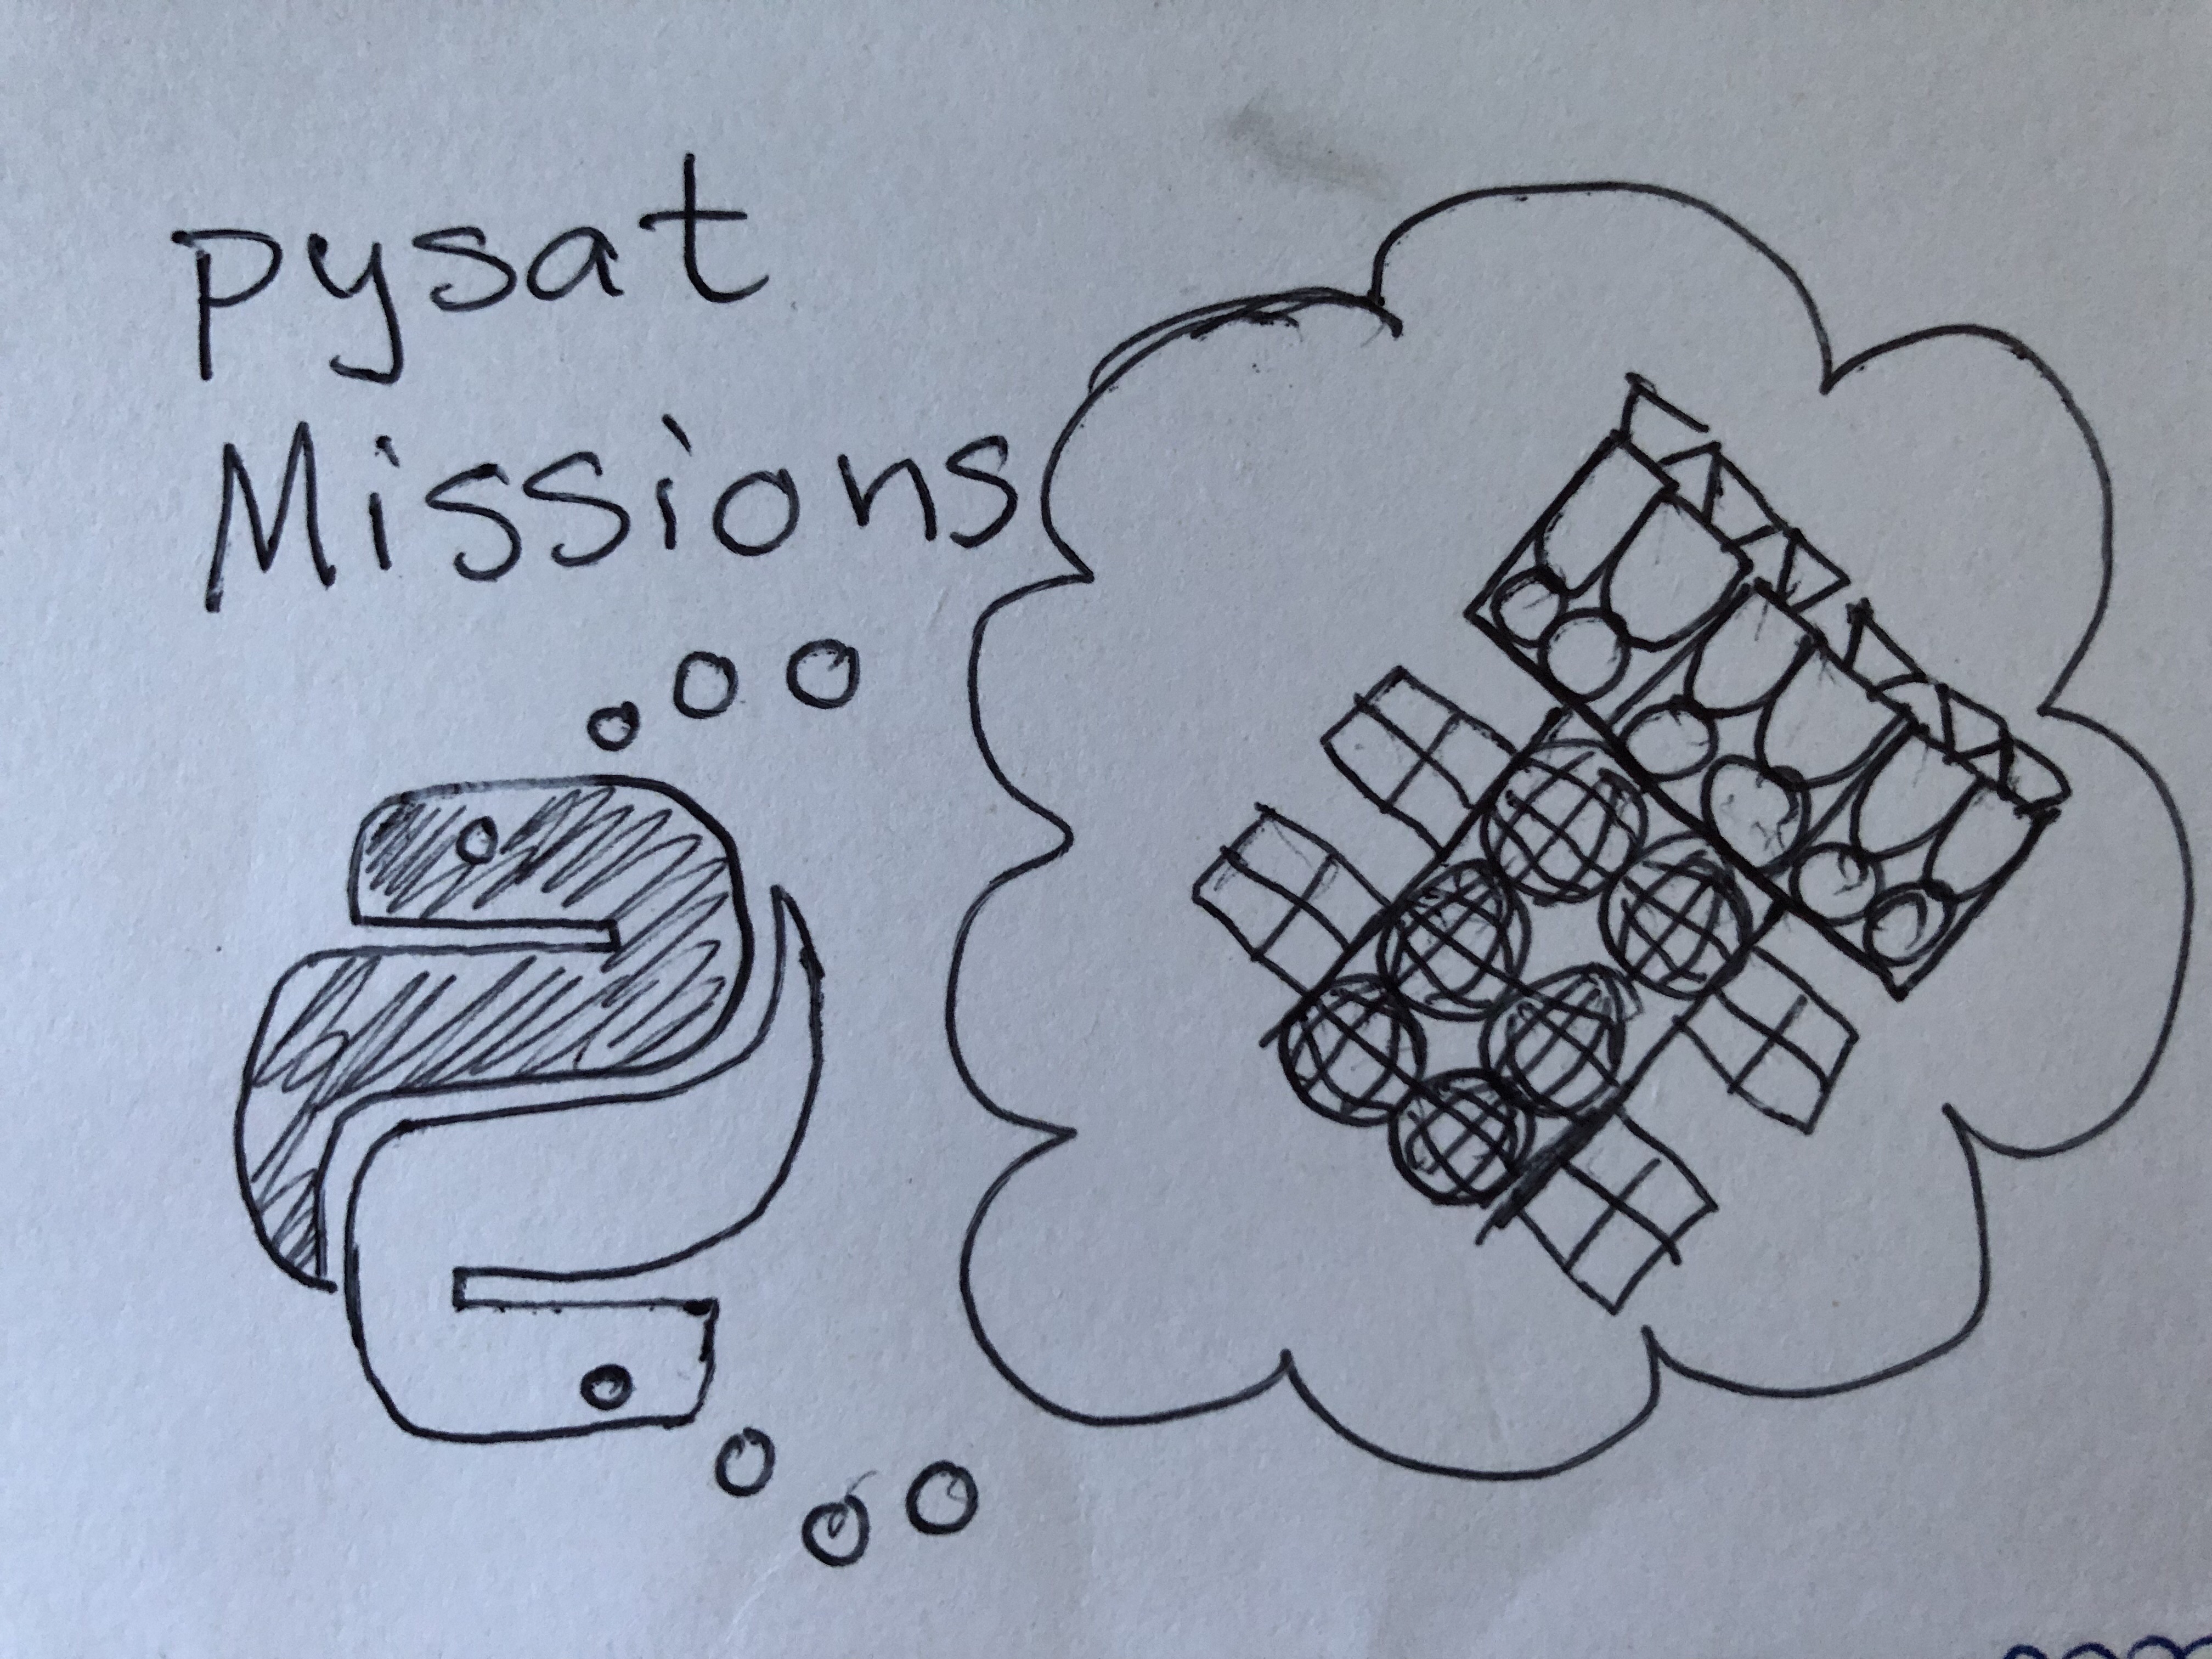 pysat Missions logo - the python snakes dreaming of a spaceship